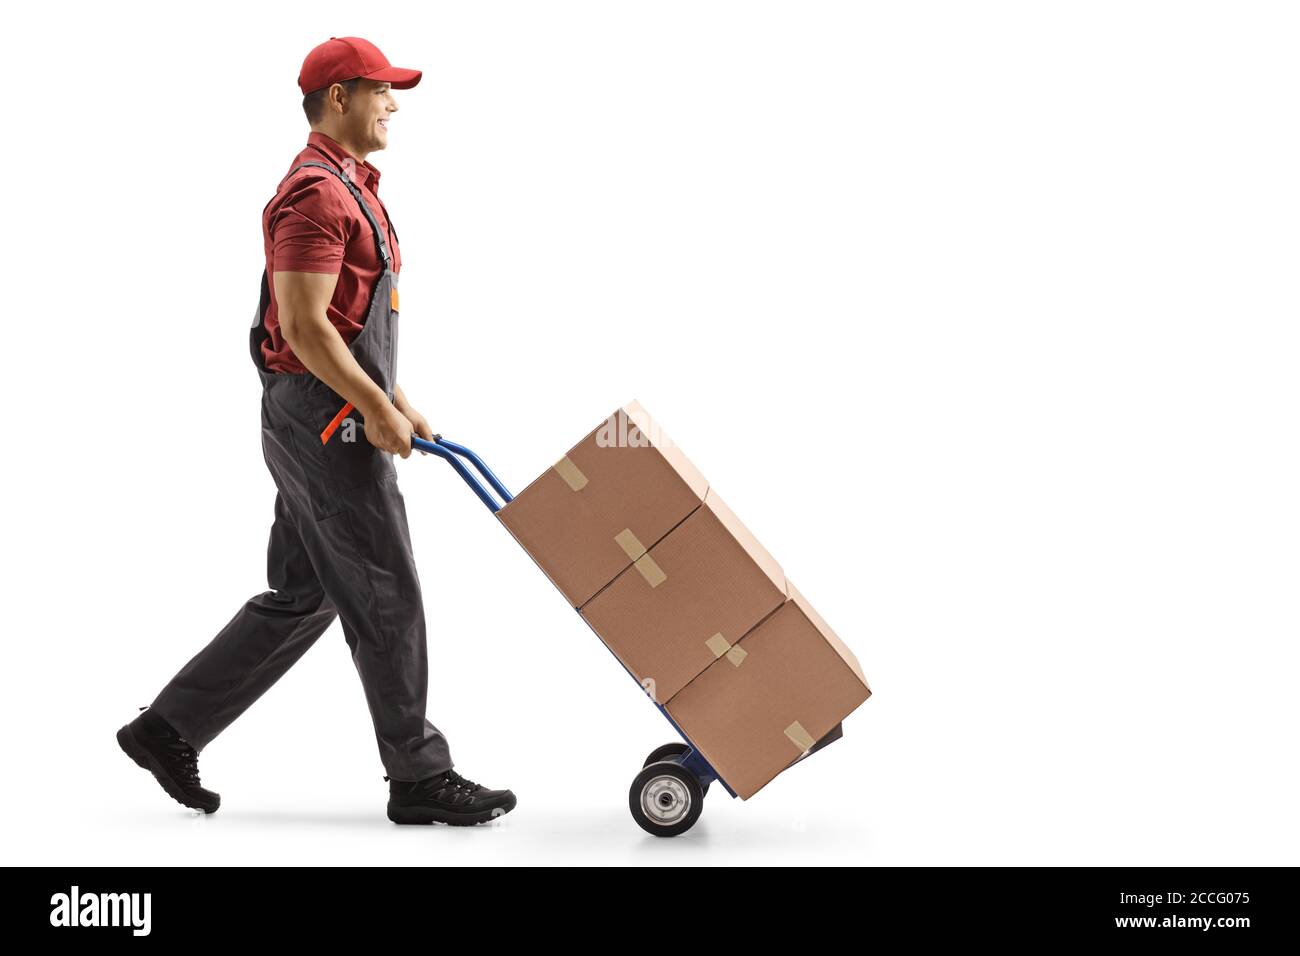 Loading man. Moving people. A man pushing a Box on the Road. A man carrying a load.